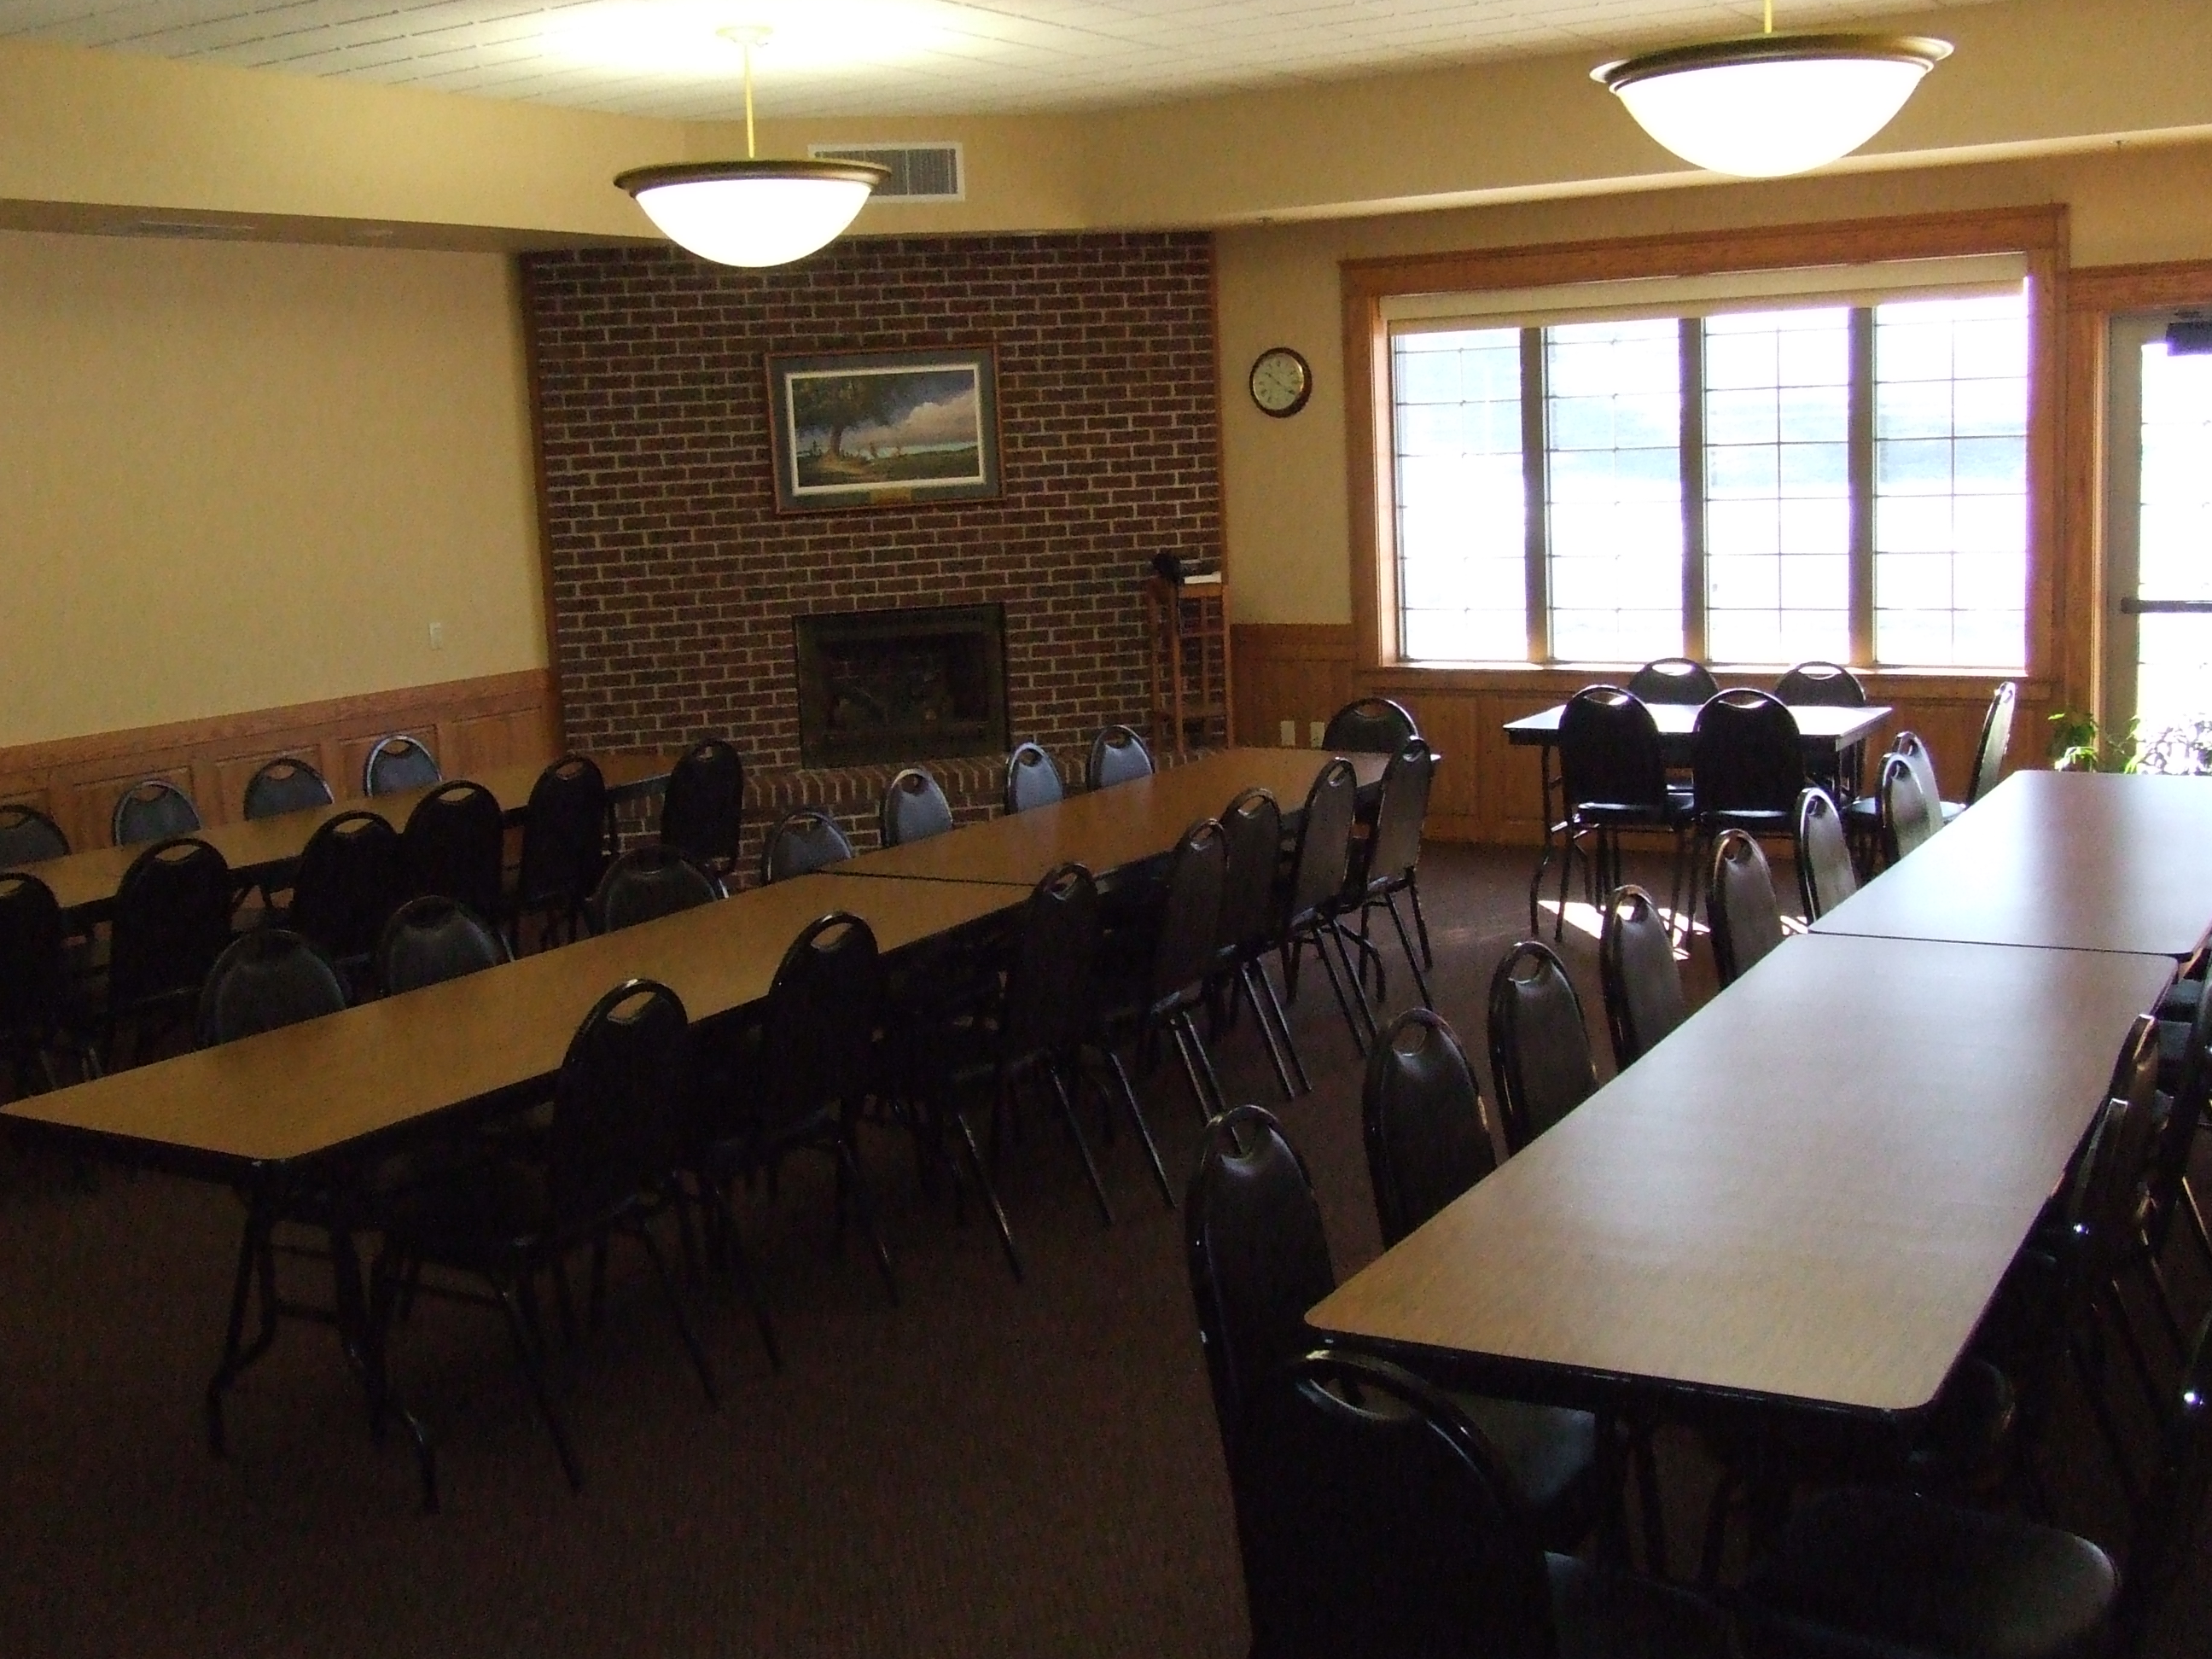 Sprague Room with tables in row configuration